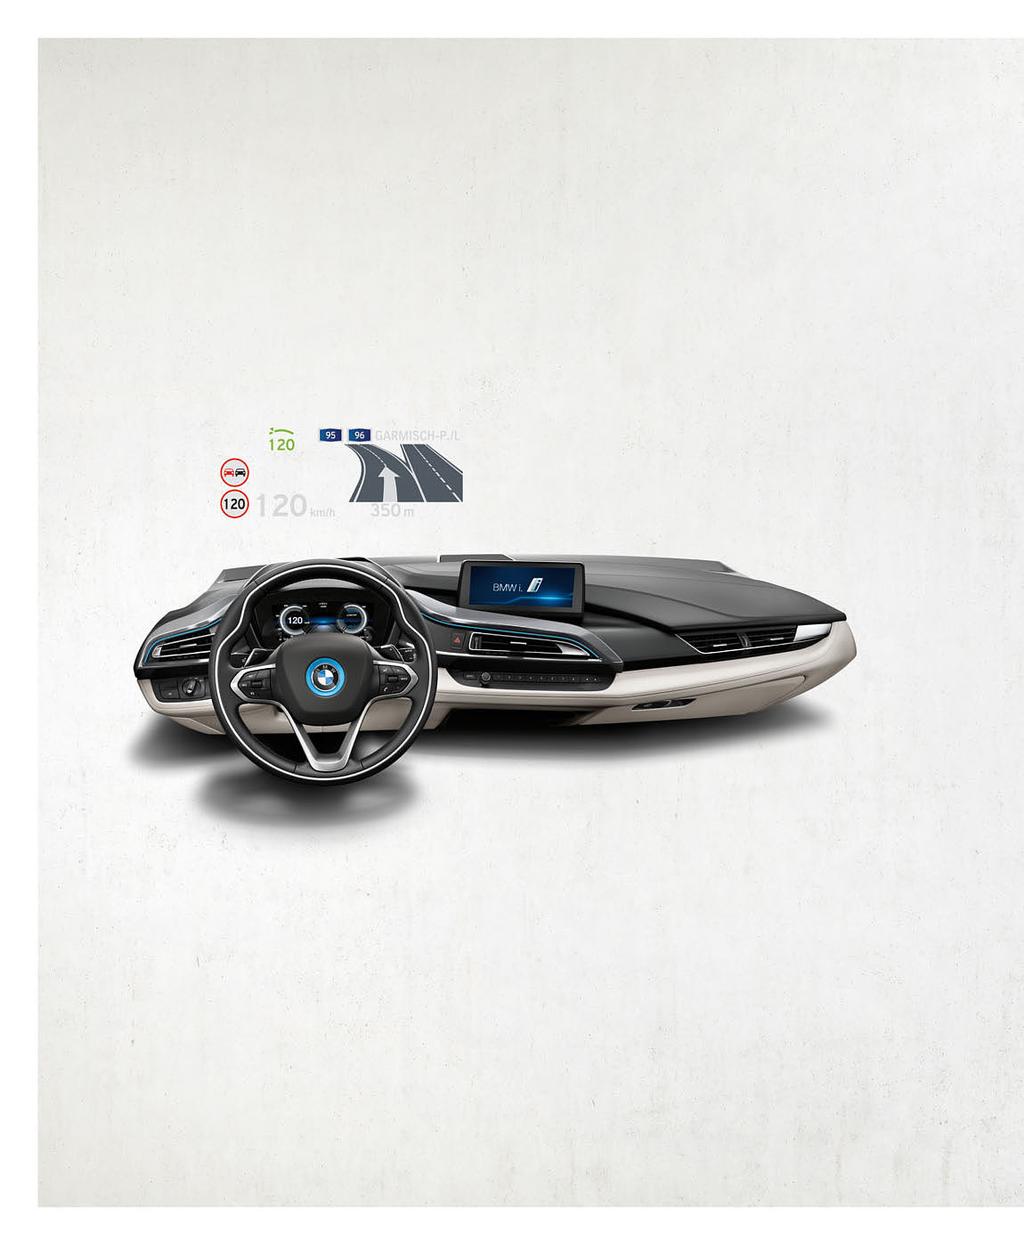 INNOVATION AND TECHNOLOGY 38 39 TOMORROW S INNOVATION. ON THE STREETS OF TODAY. BMW i CONNECTED DRIVE KEEPS THE DRIVER IN TOUCH WITH THE WORLD INSIDE AND OUTSIDE OF THE CAR.